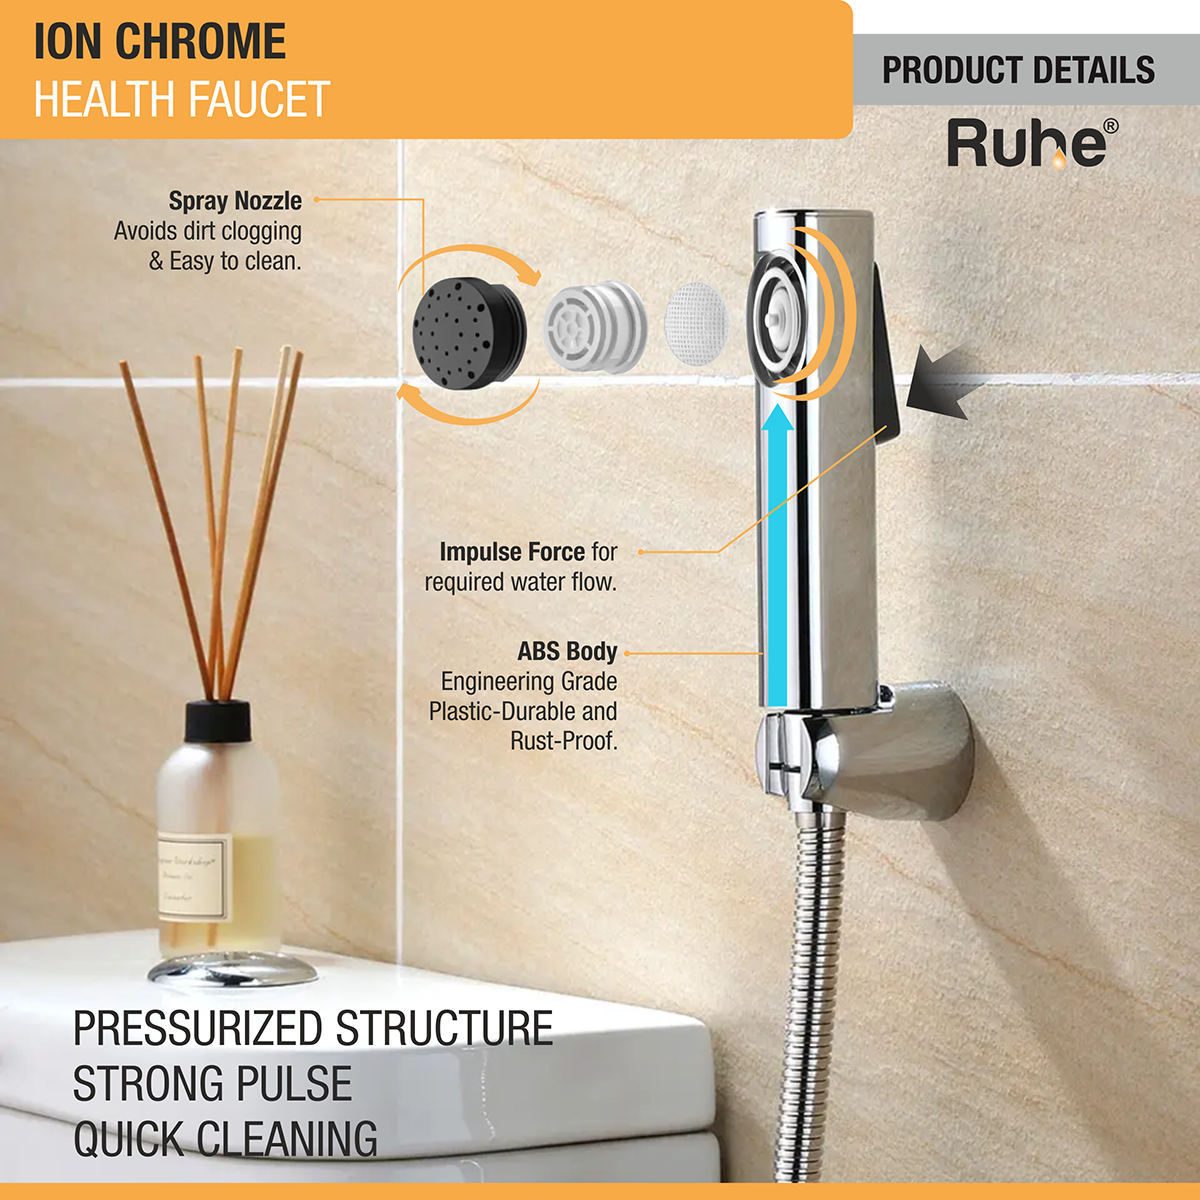 Ion Chrome Health Faucet with Braided 1 Meter Flexible Hose (304 Grade) & Hook product details and specifications